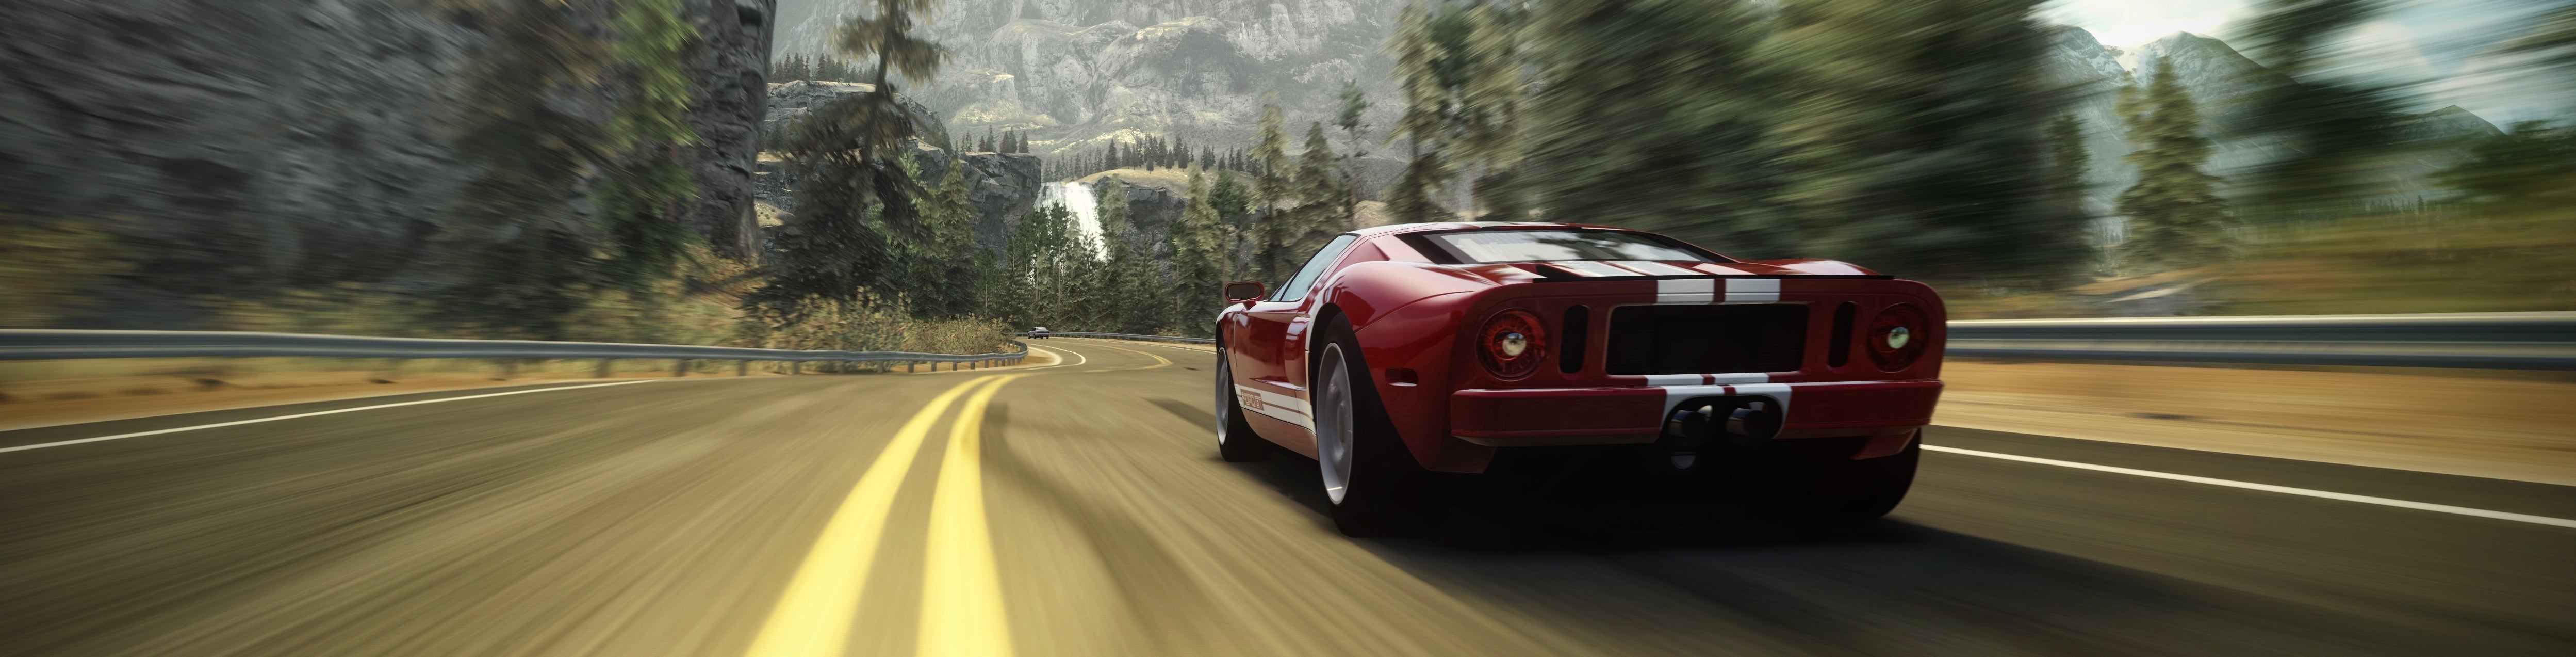 Image for Games of 2012: Forza Horizon